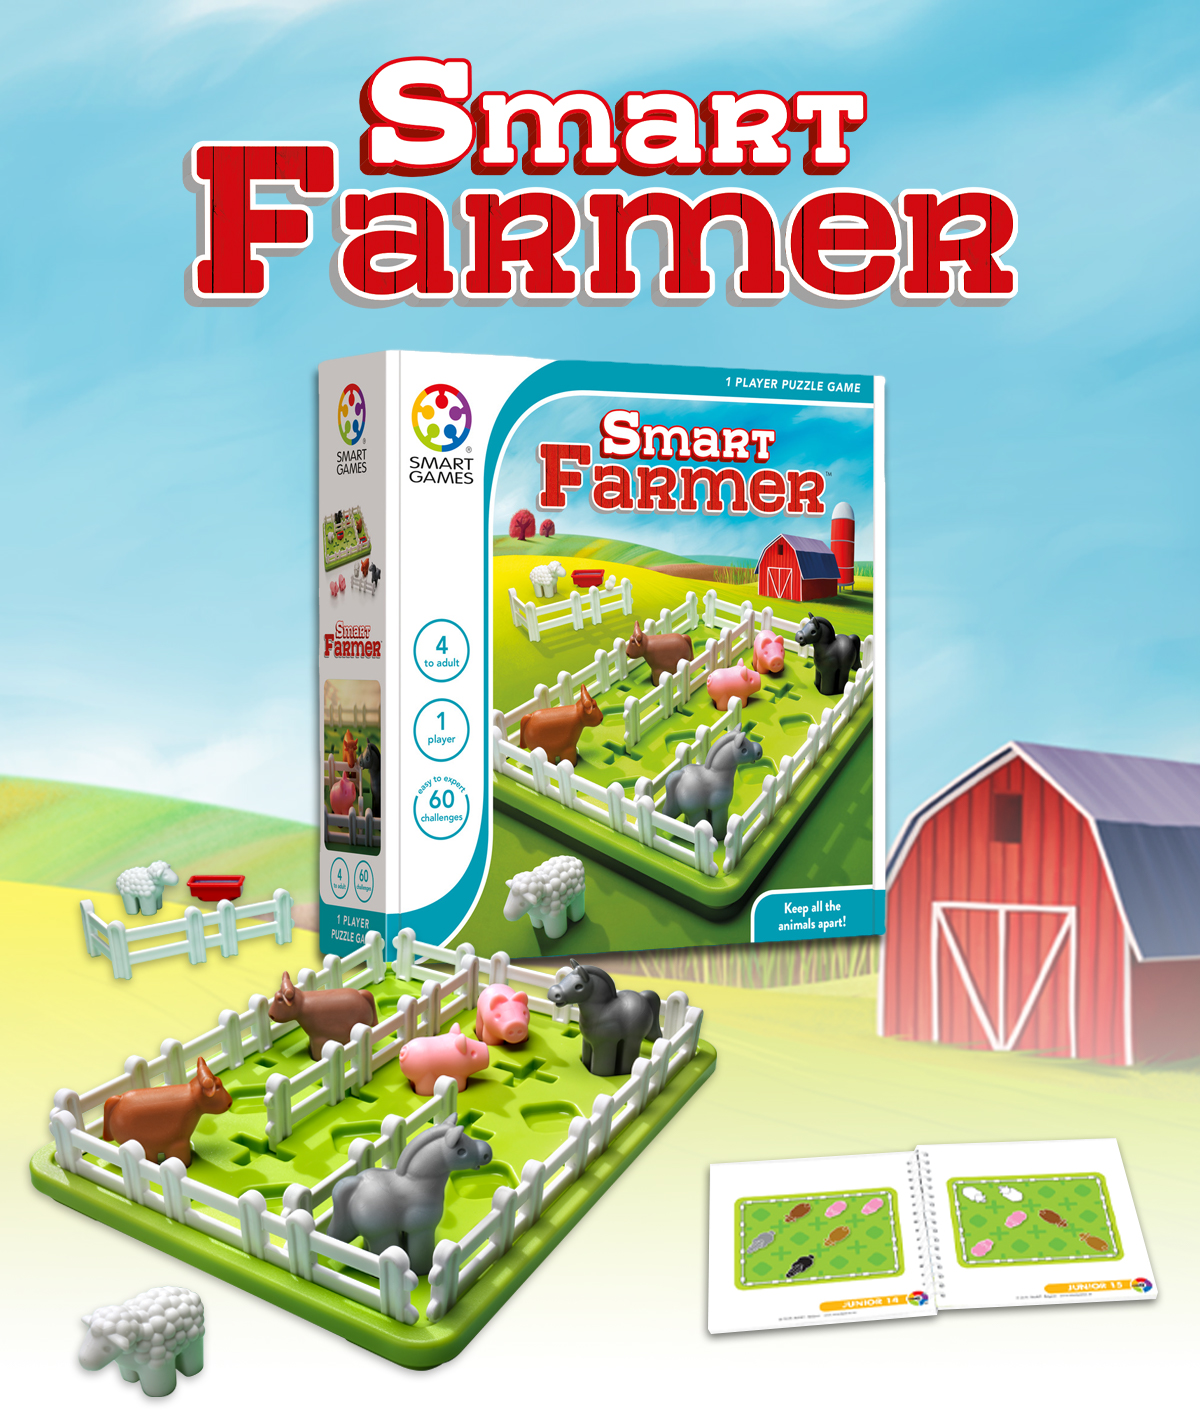 SmartGames Smart Farmer One Player Puzzle Game for sale online